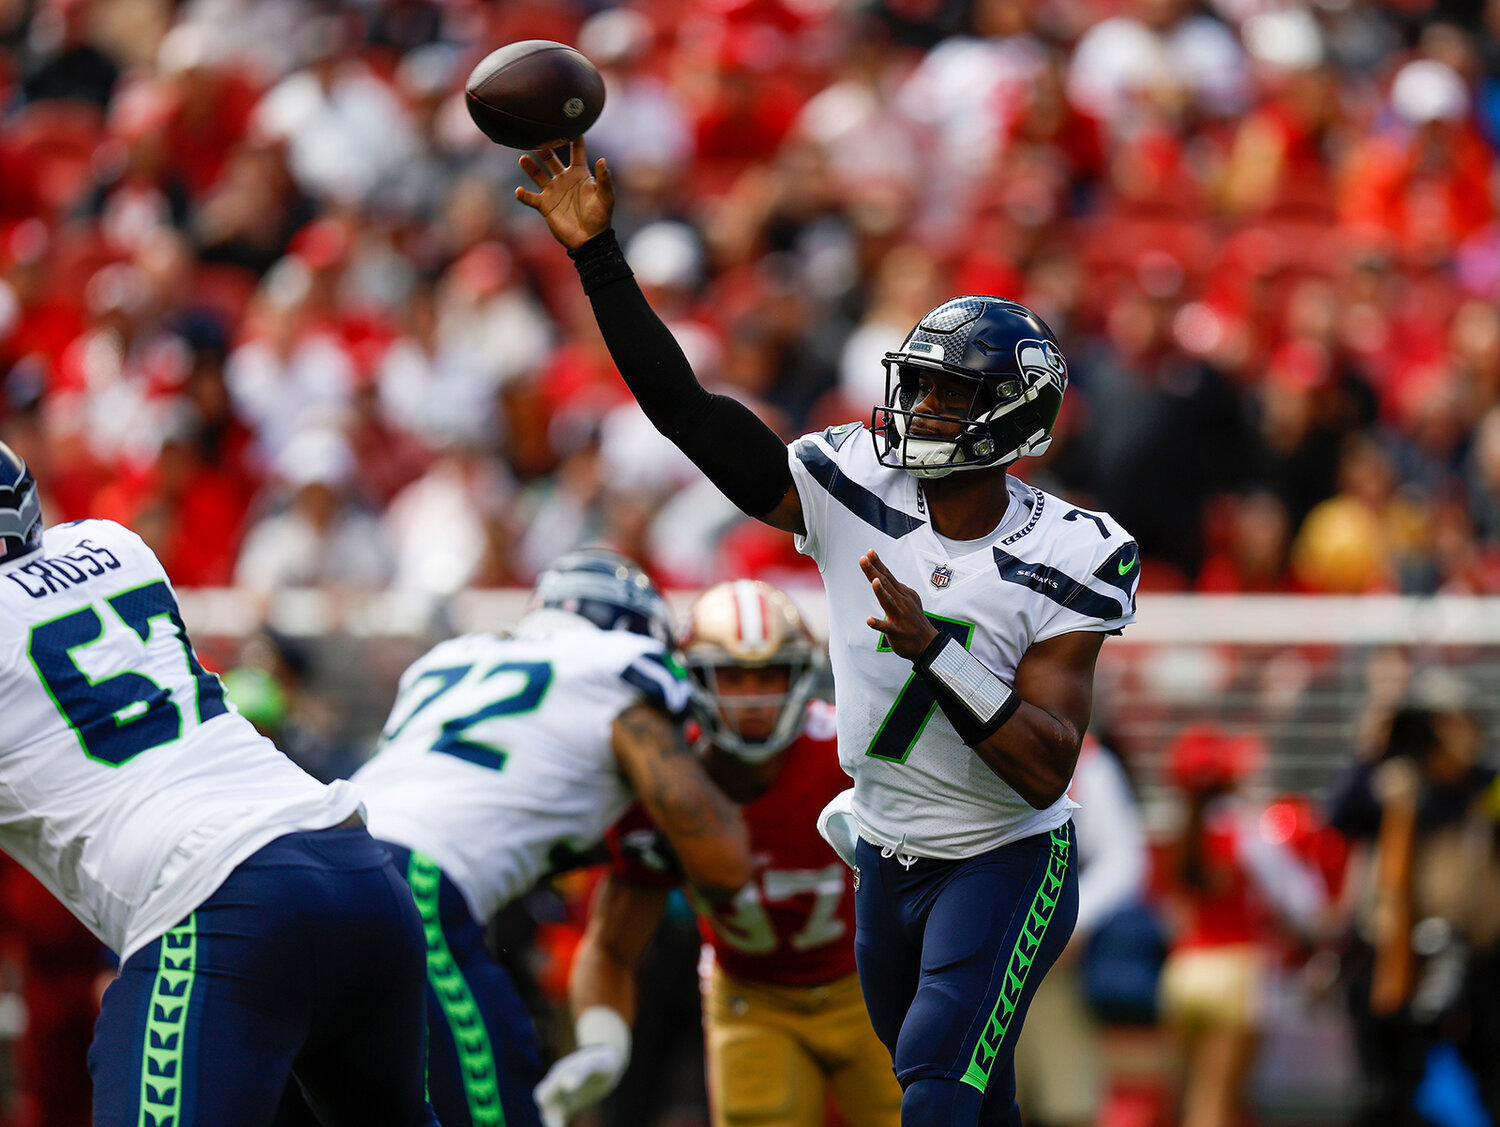 Seattle Seahawks starting quarterback Geno Smith (7) throws against the San Francisco 49ers in the first quarter at Levi's Stadium in Santa Clara, Calif., on Sunday, Sept. 18, 2022. (Nhat V. Meyer/Bay Area News Group/TNS)